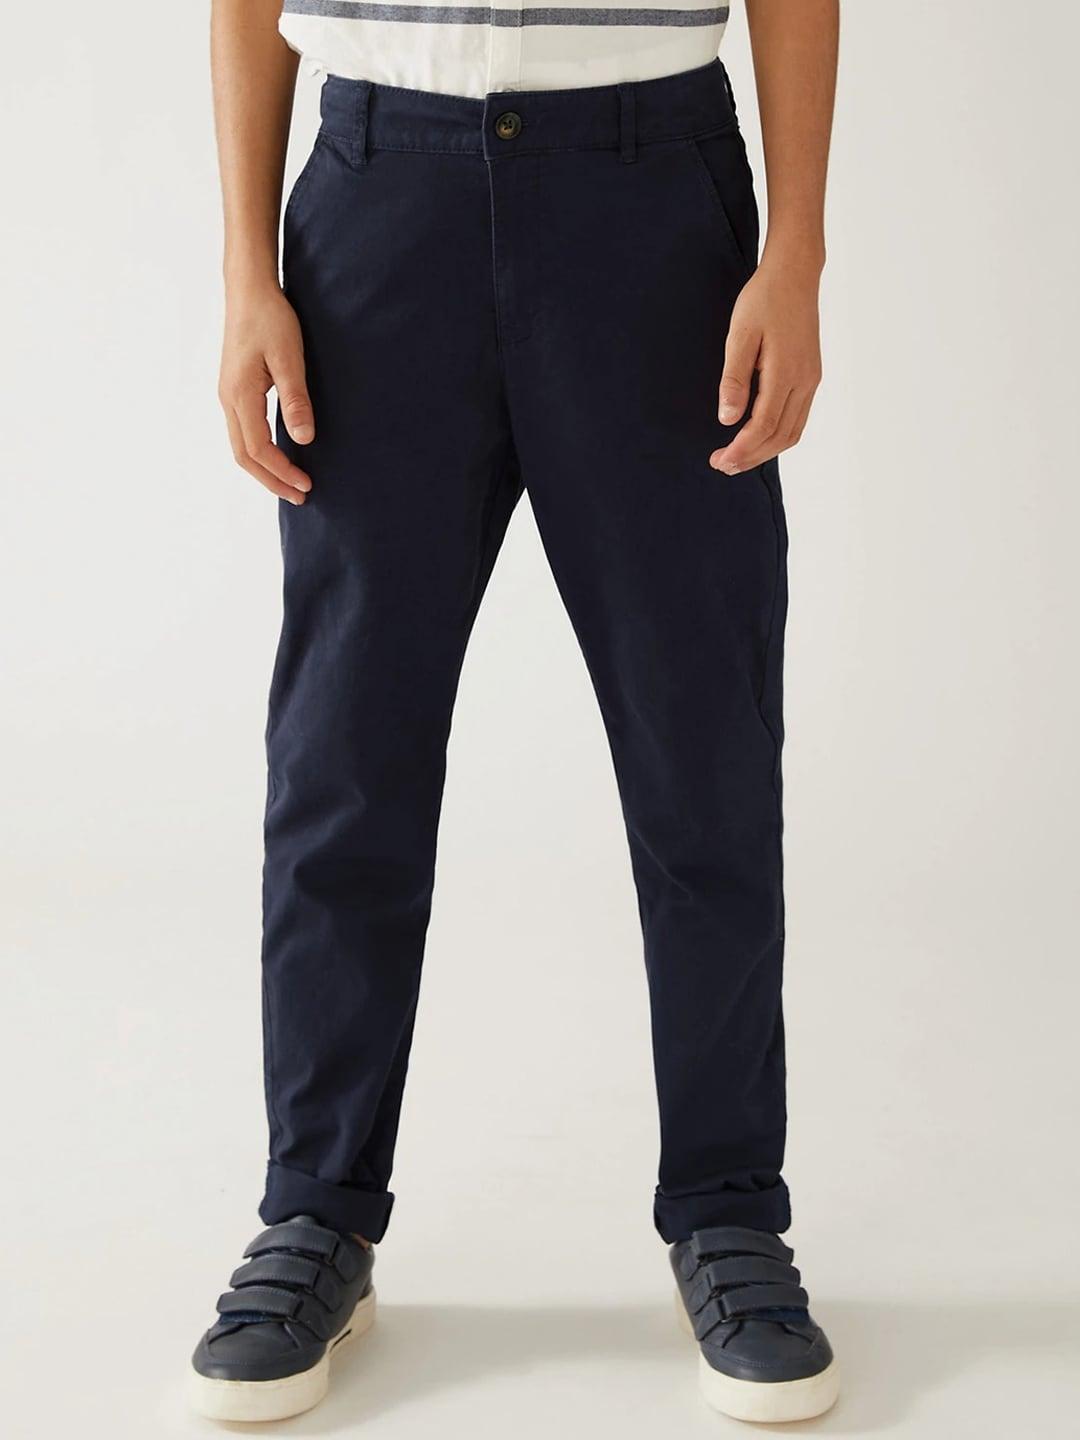 Marks & Spencer Boys Chinos Trousers